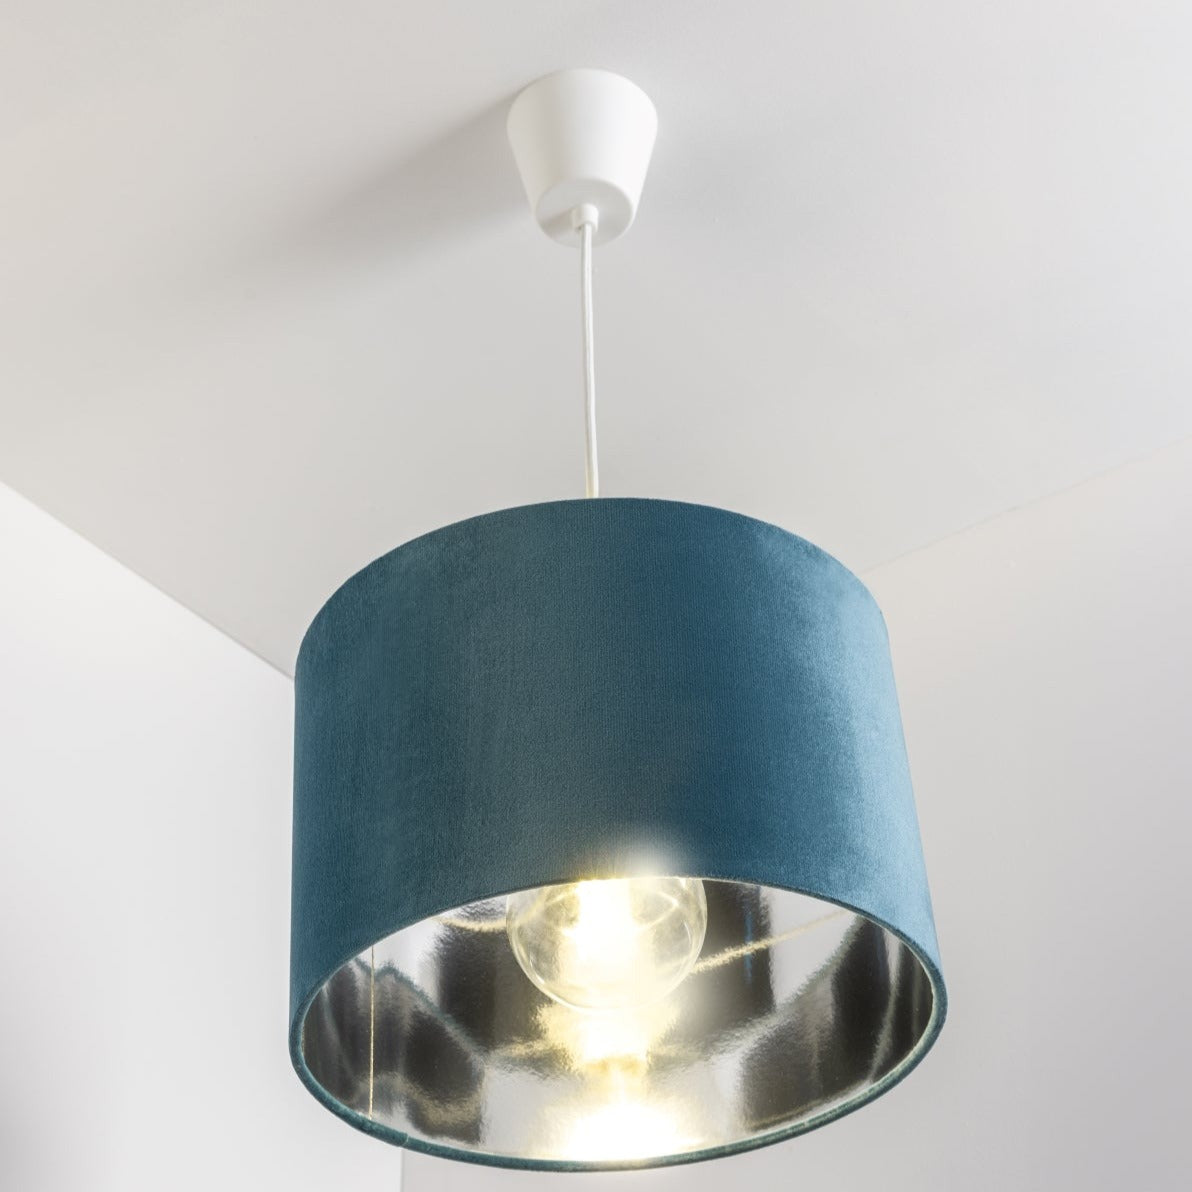 Our Nila velvet shade is sophisticated in appearance and we have designed the shade to  suit a range of interiors. Easy to fit, it’s crafted from high-quality velvet on the outer and has a reflective silver metallic inner. It's made to fit both a ceiling light or lamp base.